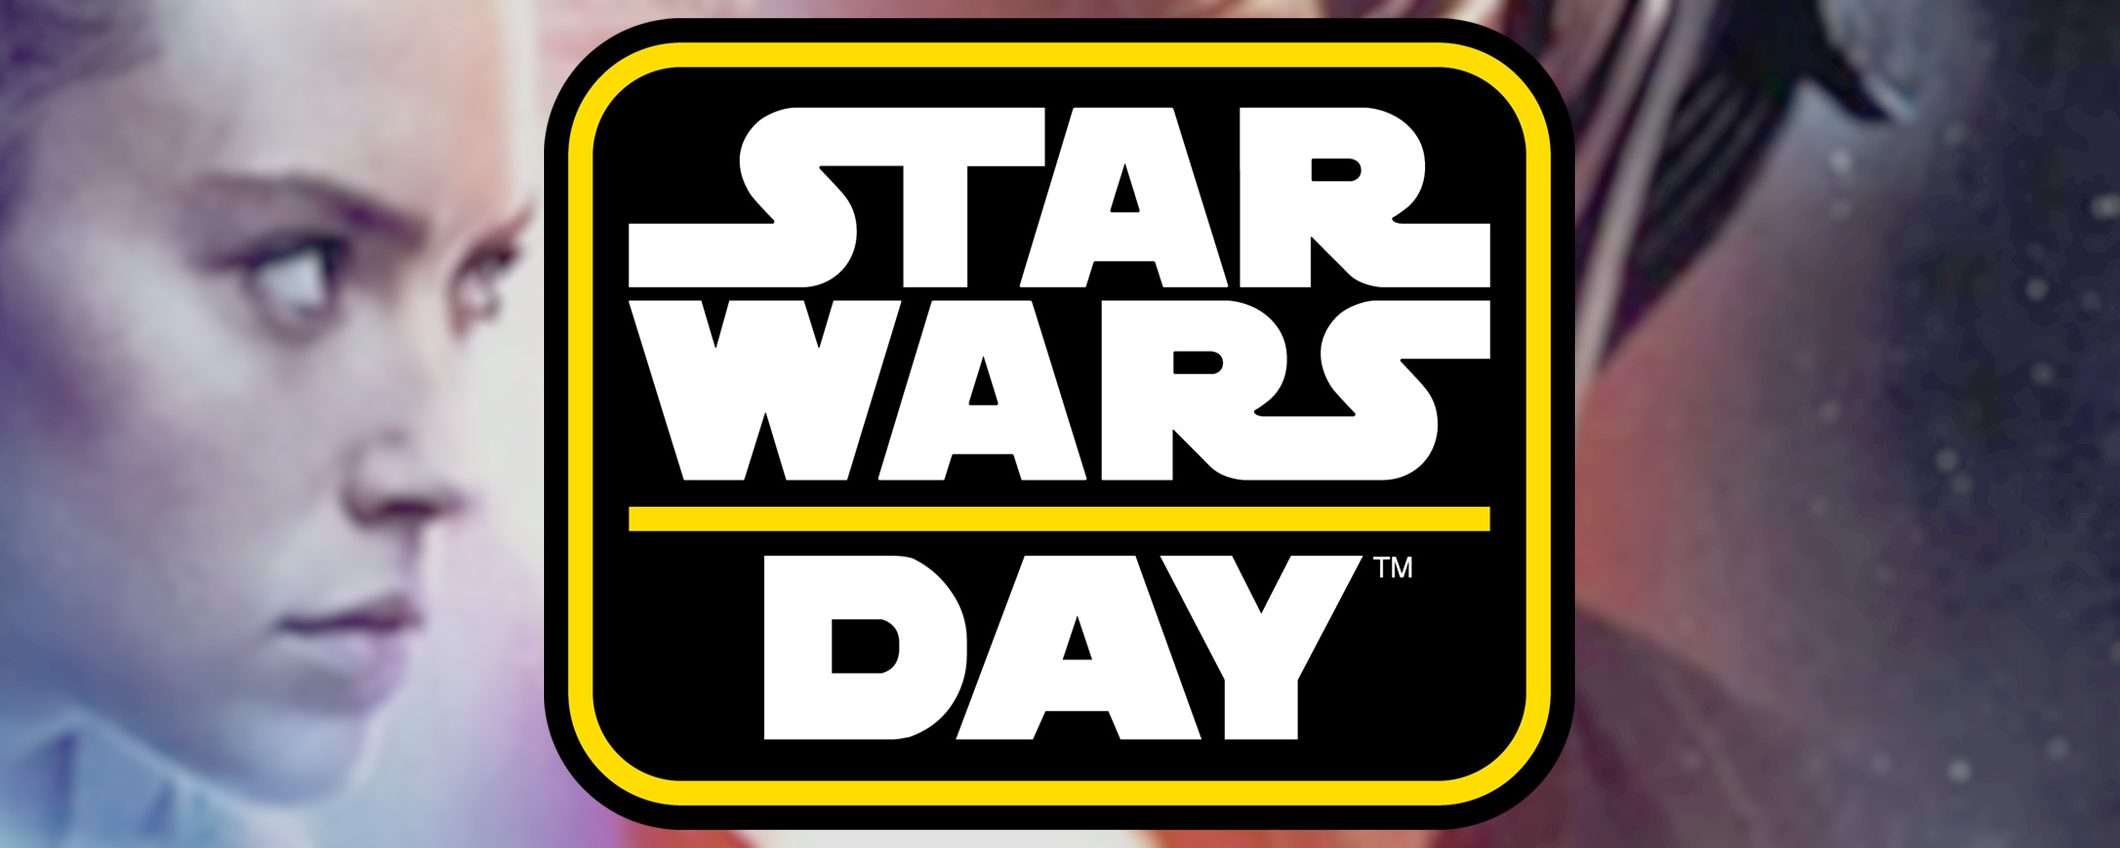 Star Wars Day: May the 4th be with you (offerte)